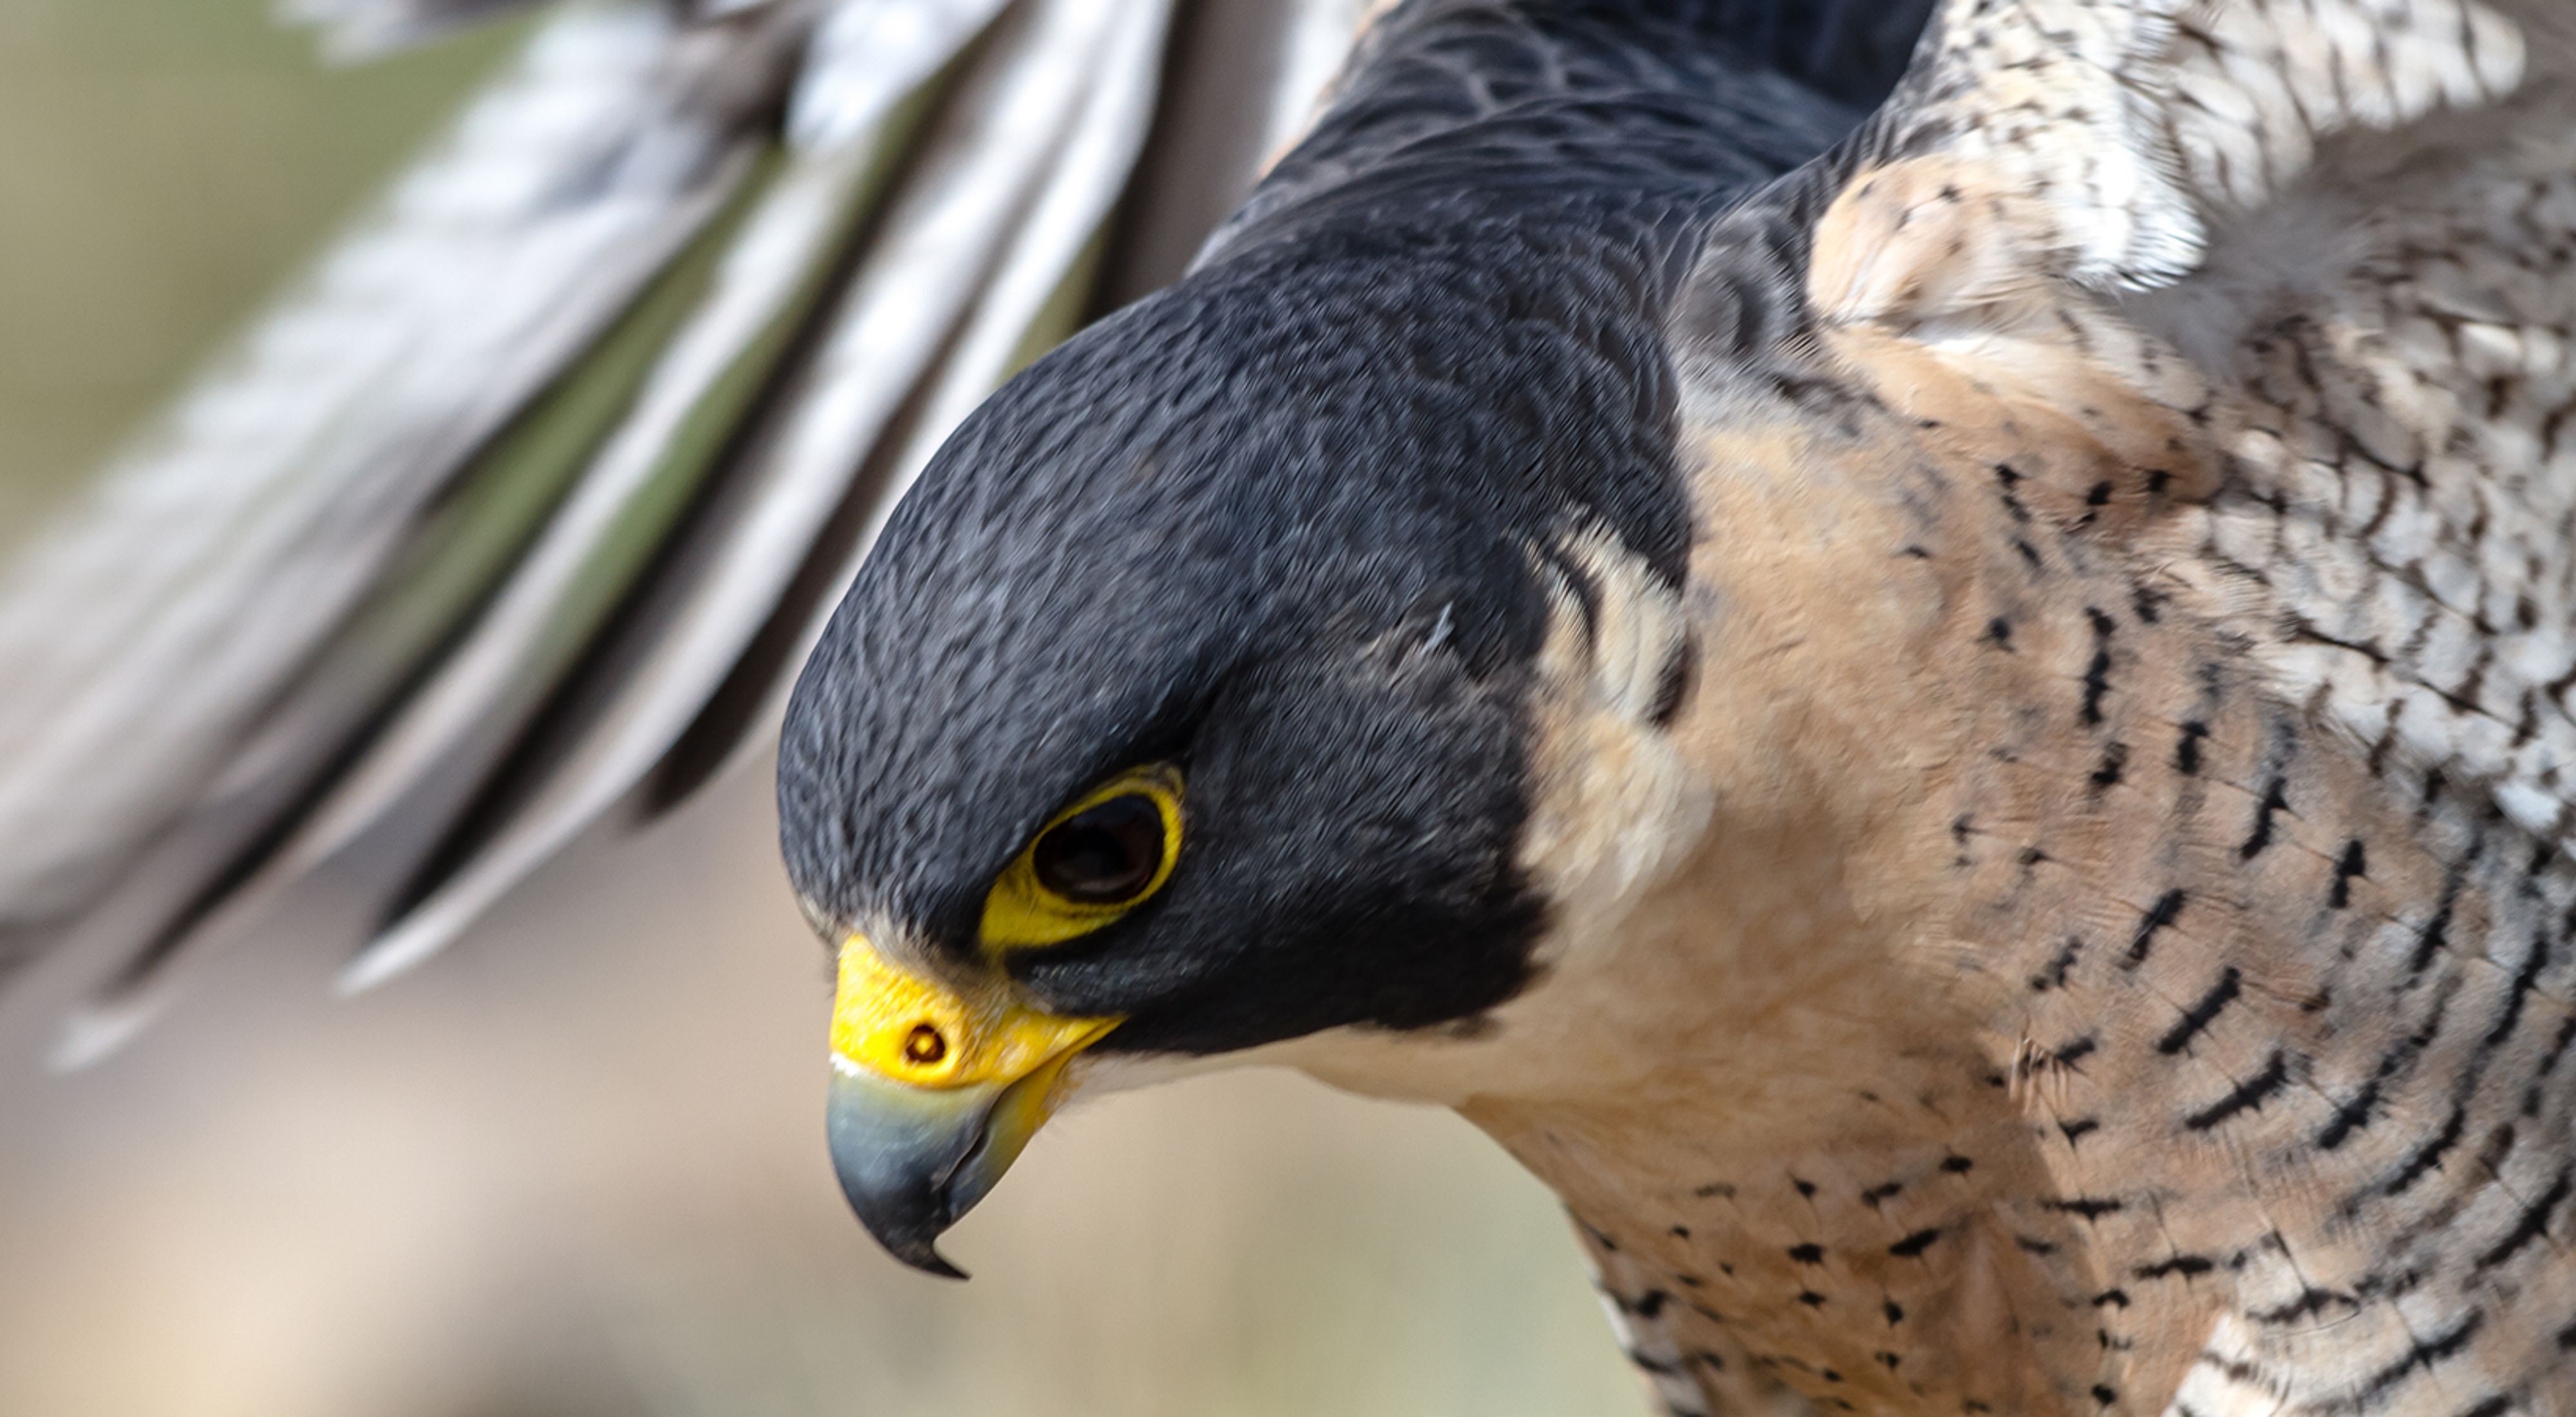 Closeup of the head and neck of a peregrine falcon--a bird of prey with a gray head, bright yellow skin around the eyes and beak, and white body feathers with a few black stripes.